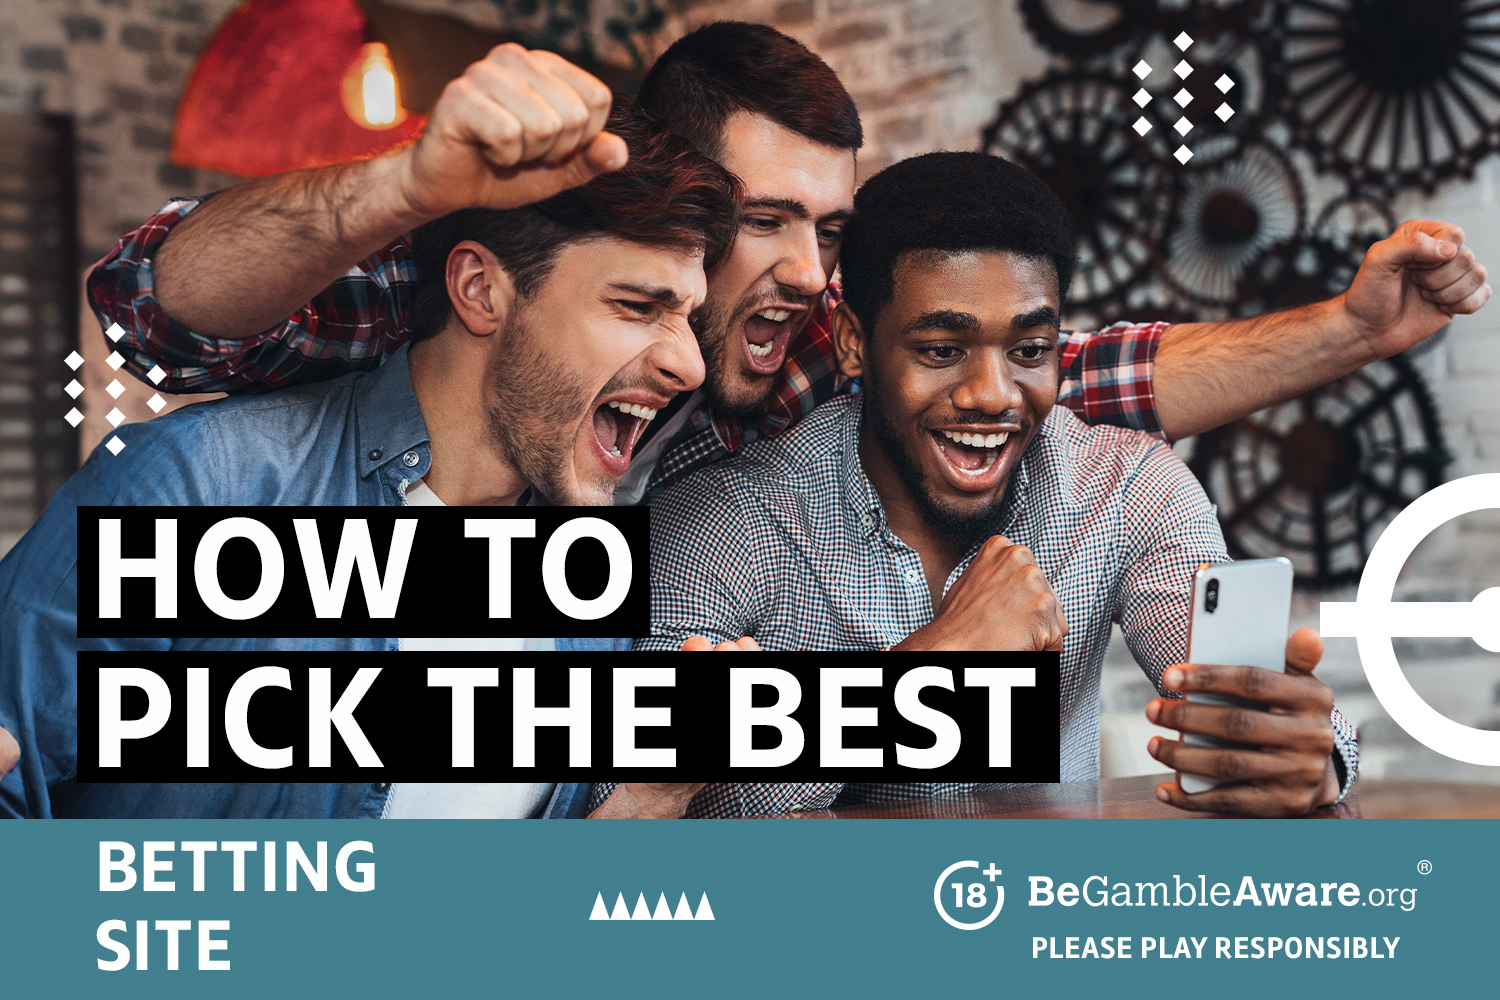 How to pick the best betting sites. 18+ BeGambleAware.org - Please play responsibly.